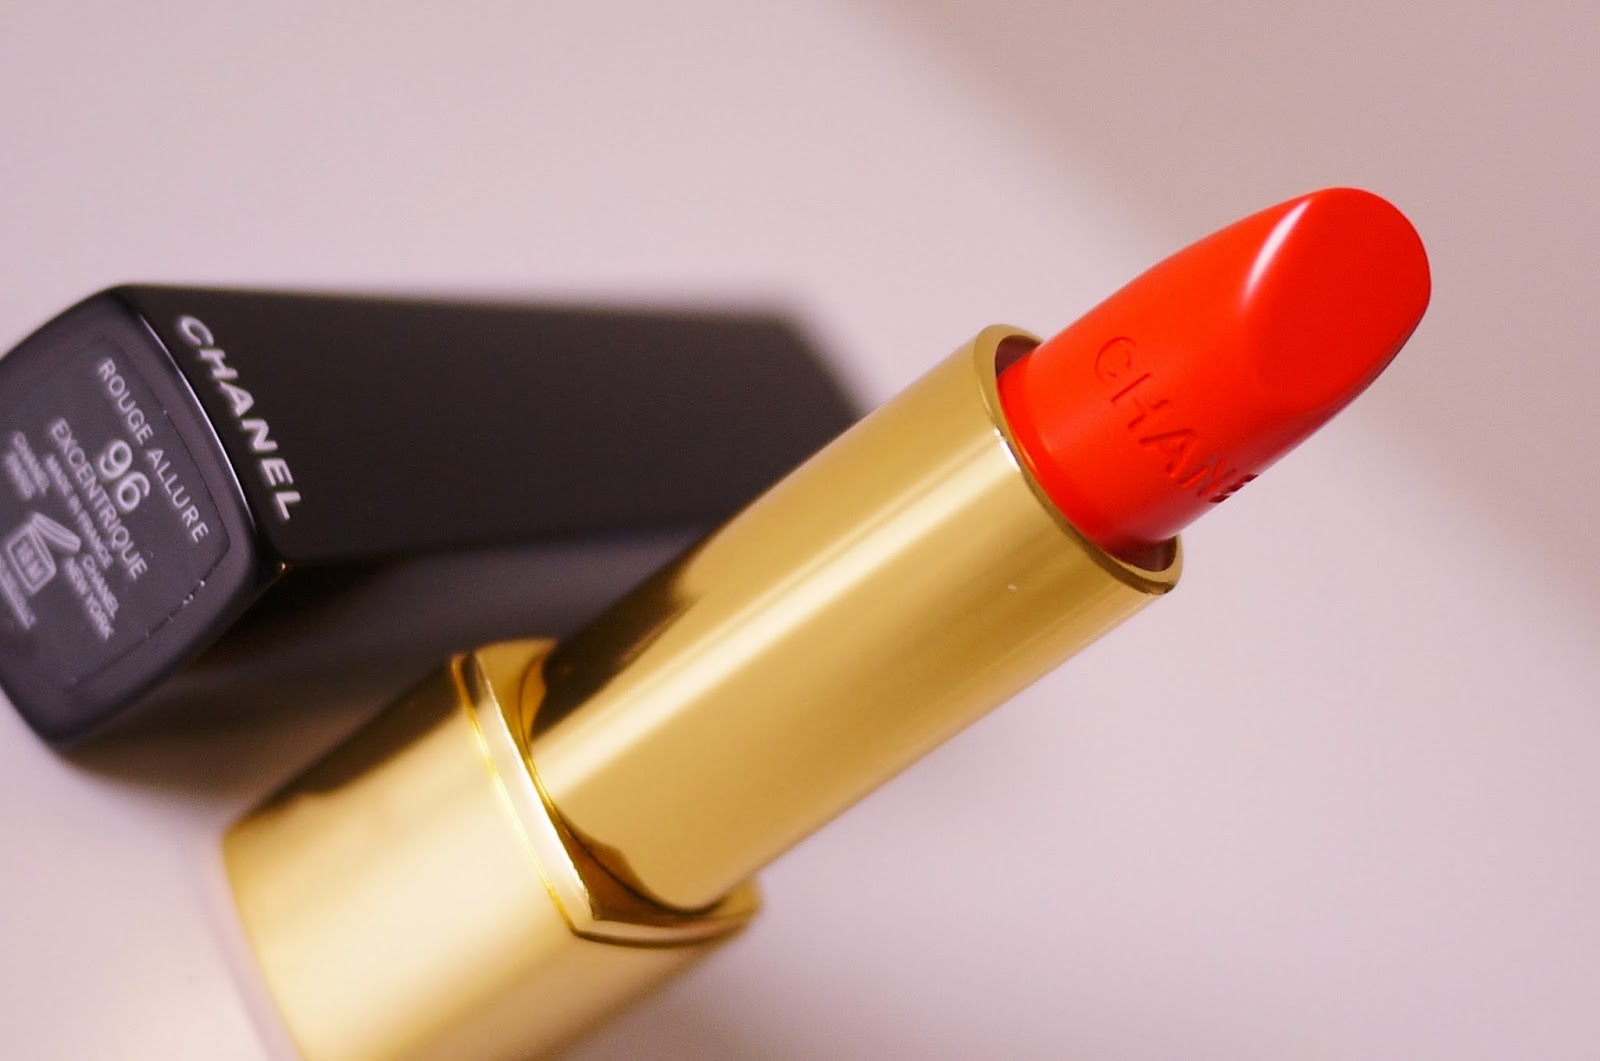 Making up 4 my age: Chanel Rouge Allure Luminous Intense Lip Color